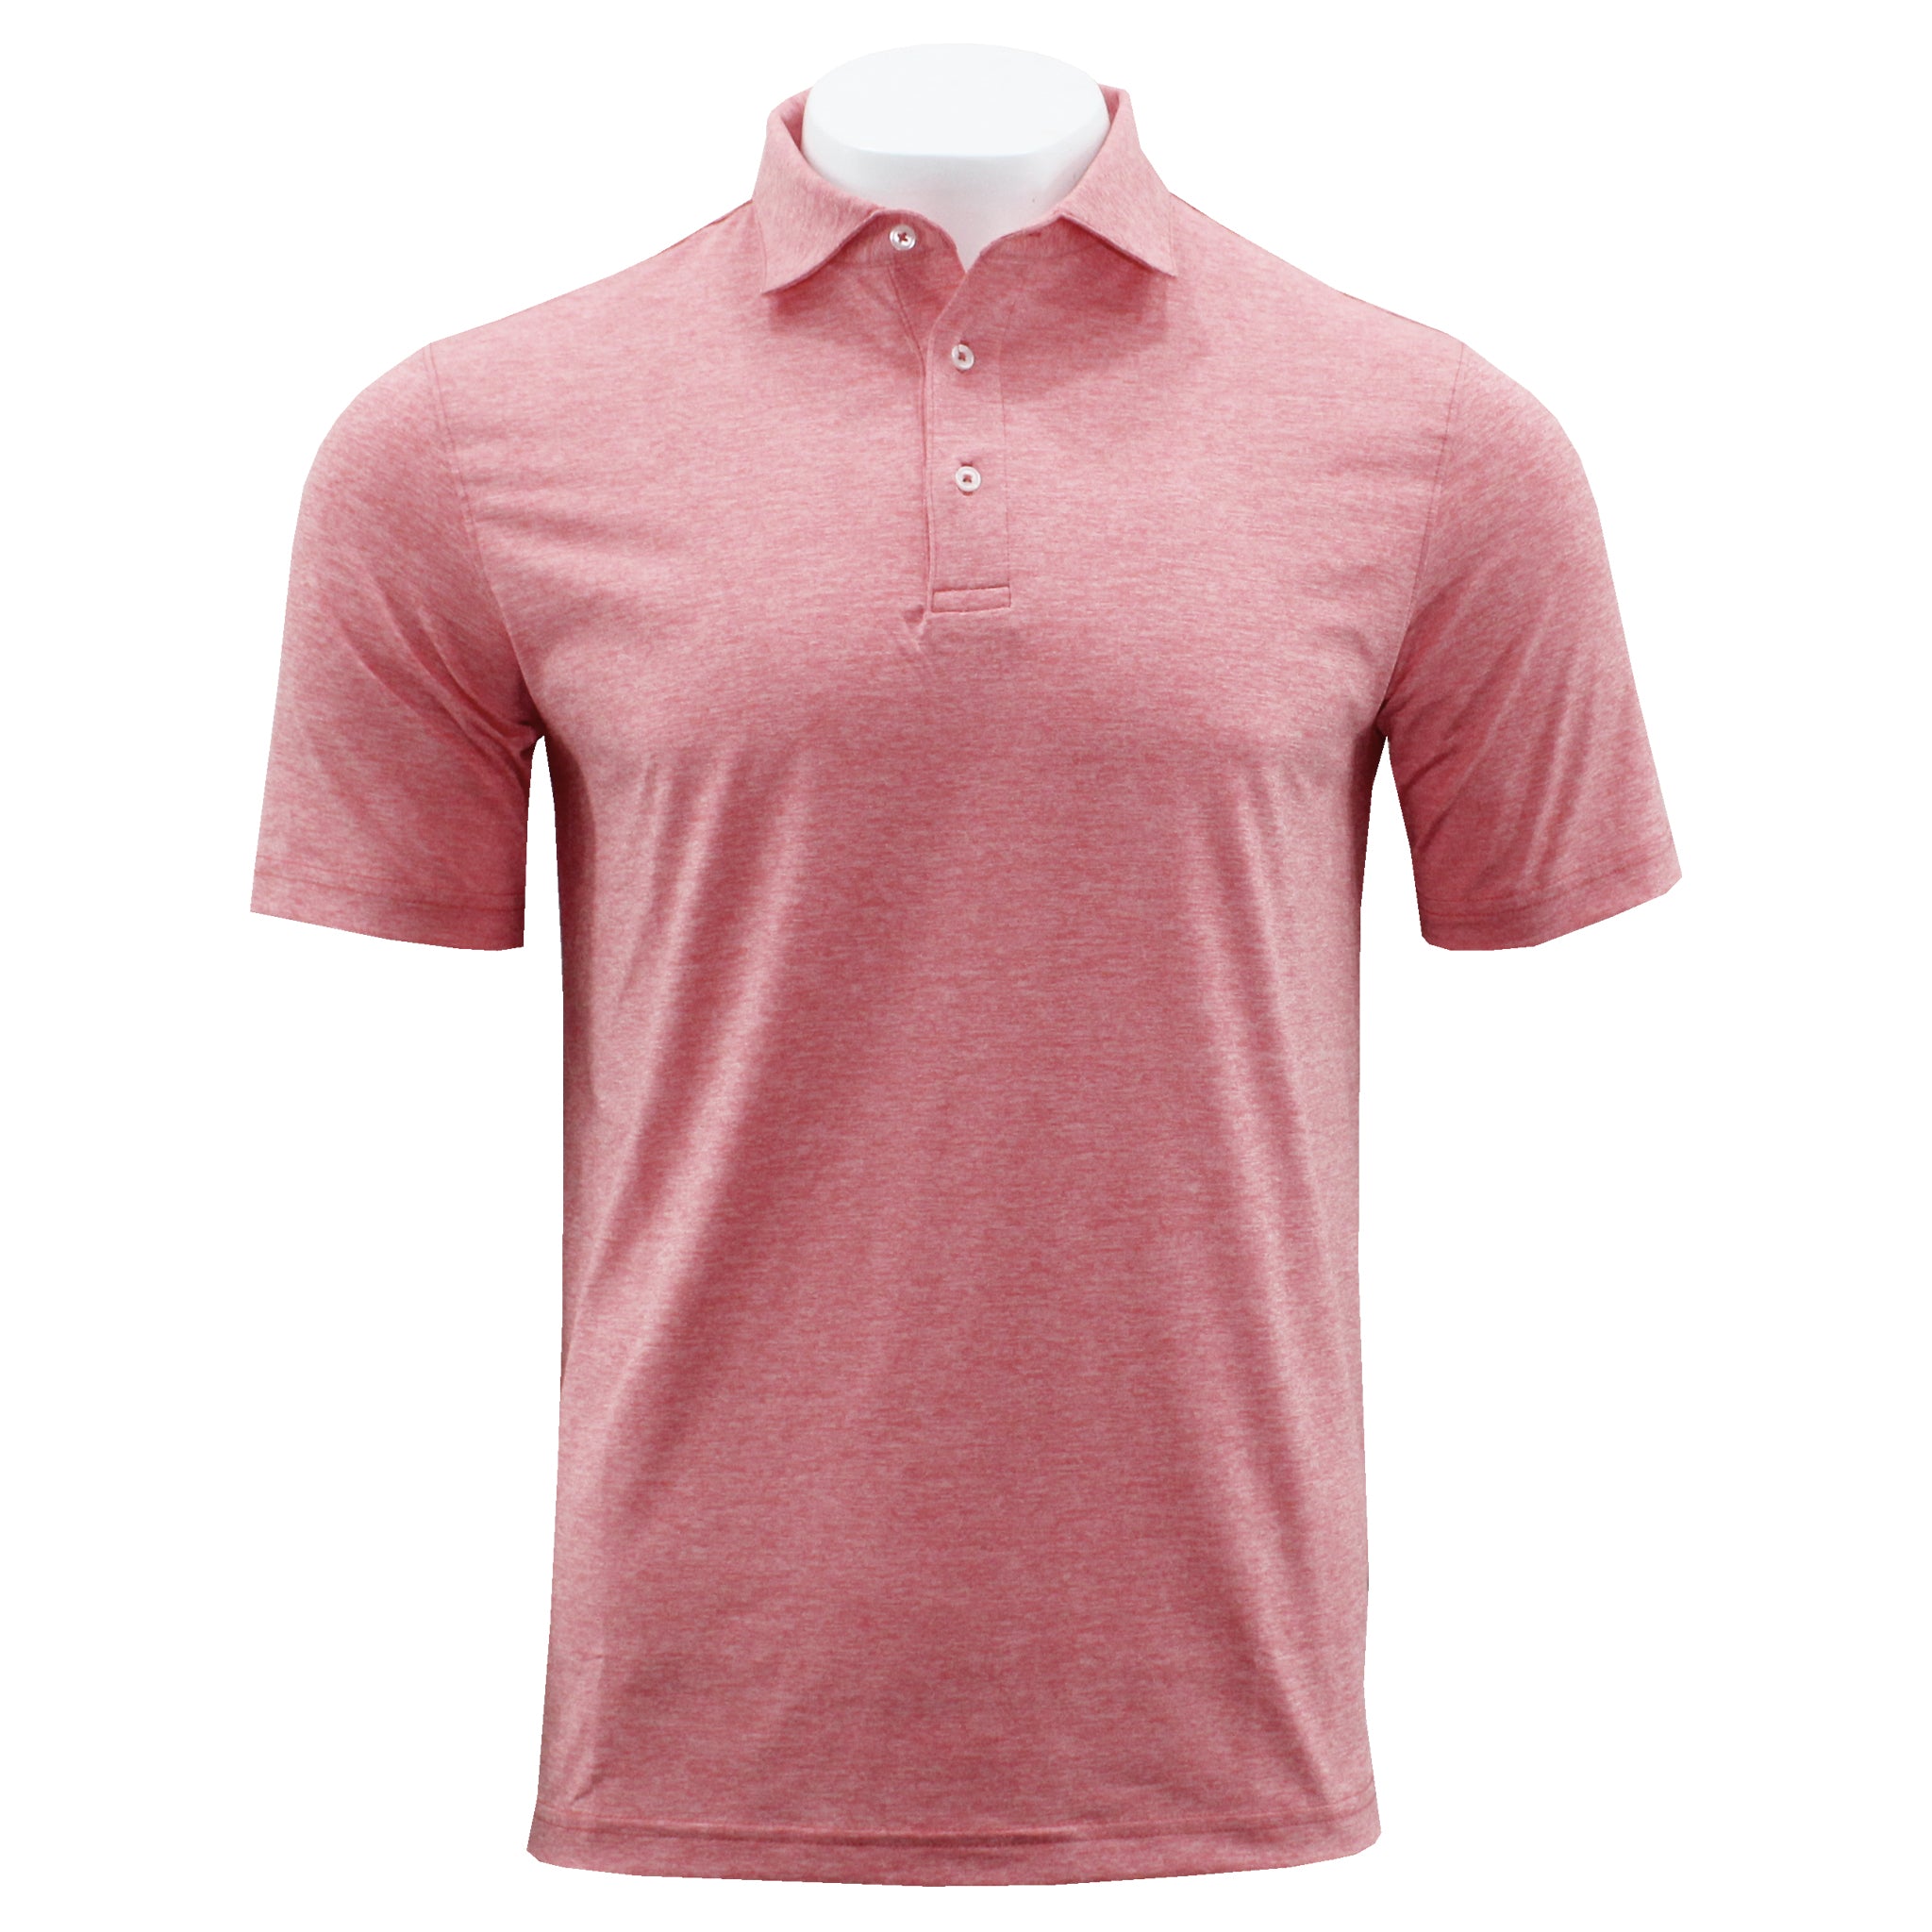 Heather Classic Fit Golf Shirt - Coral